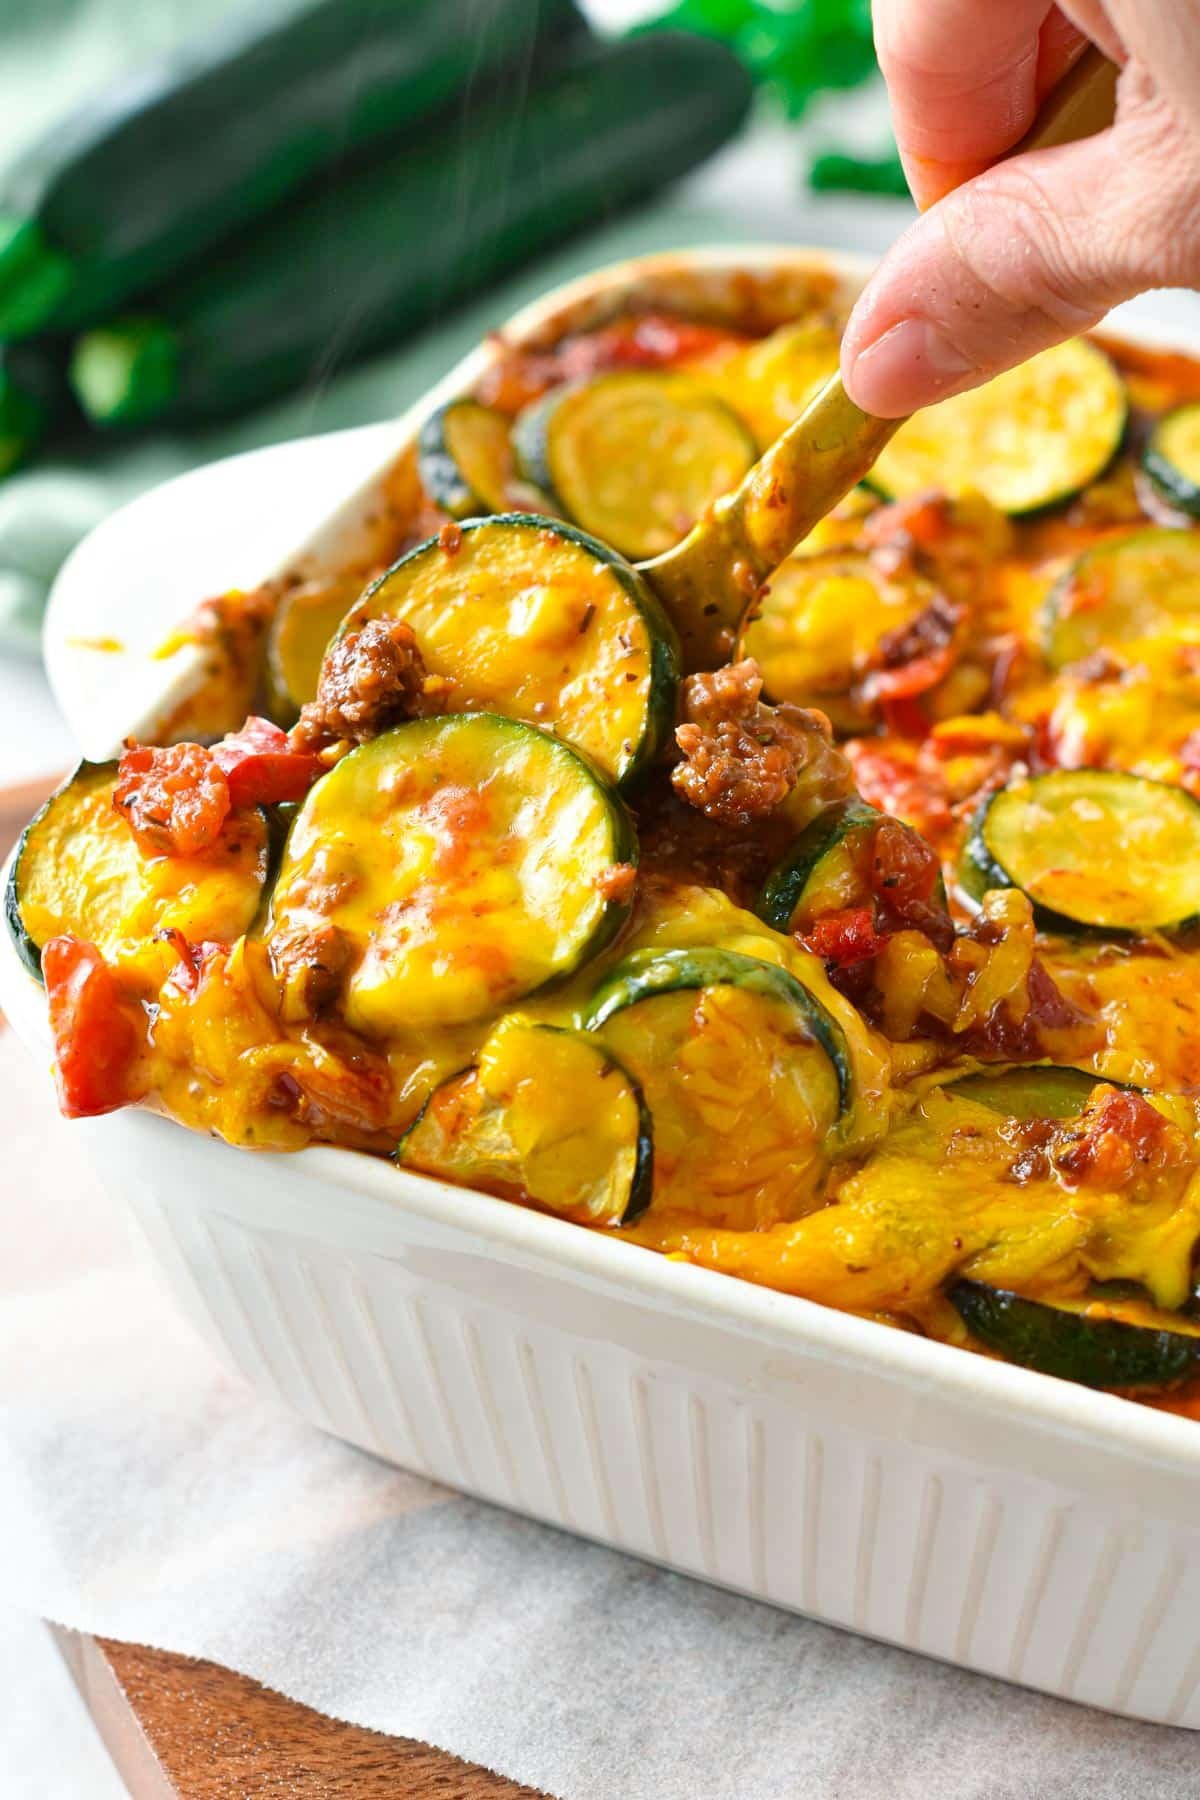 This Zucchini Sausage Casserole is an easy and healthy family dinner to use for your summer zucchini. Delicious crunchy zucchini slices, cooked in a homemade tomato sauce with tasty pieces of ground sausage. 